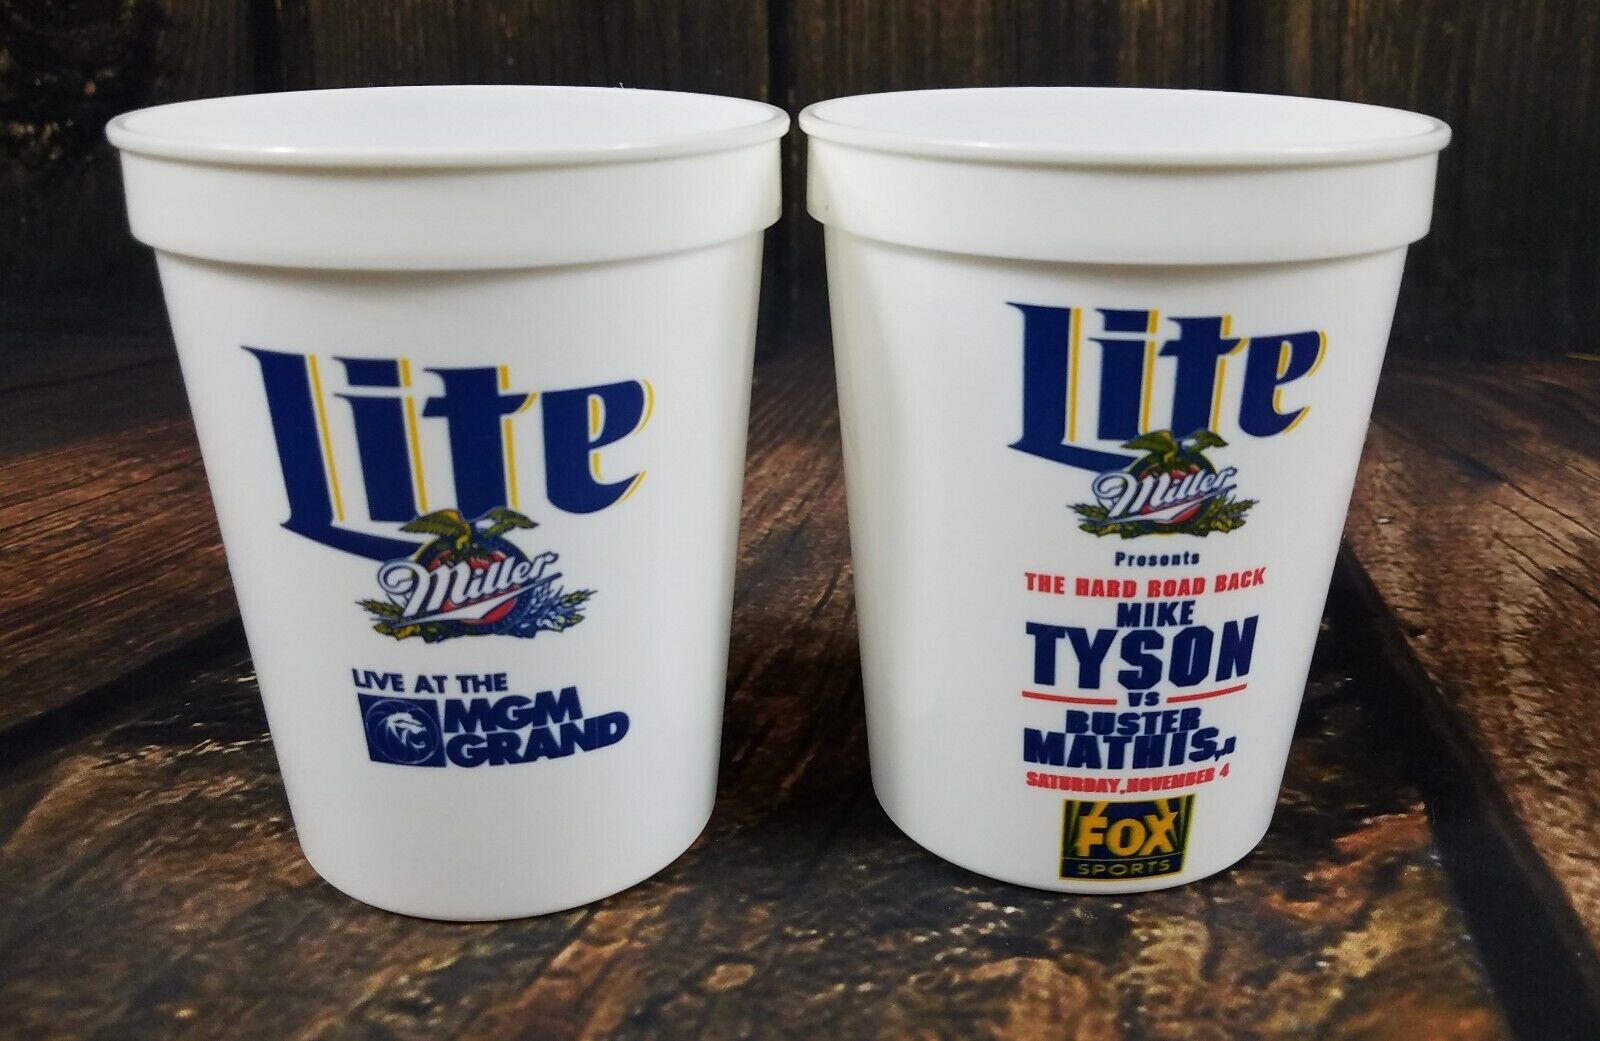 Mike Tyson Event Cups Buster Mathis Jr MGM Grand Miller Lite USA Lot 2 Vintage Louisiana Plastics